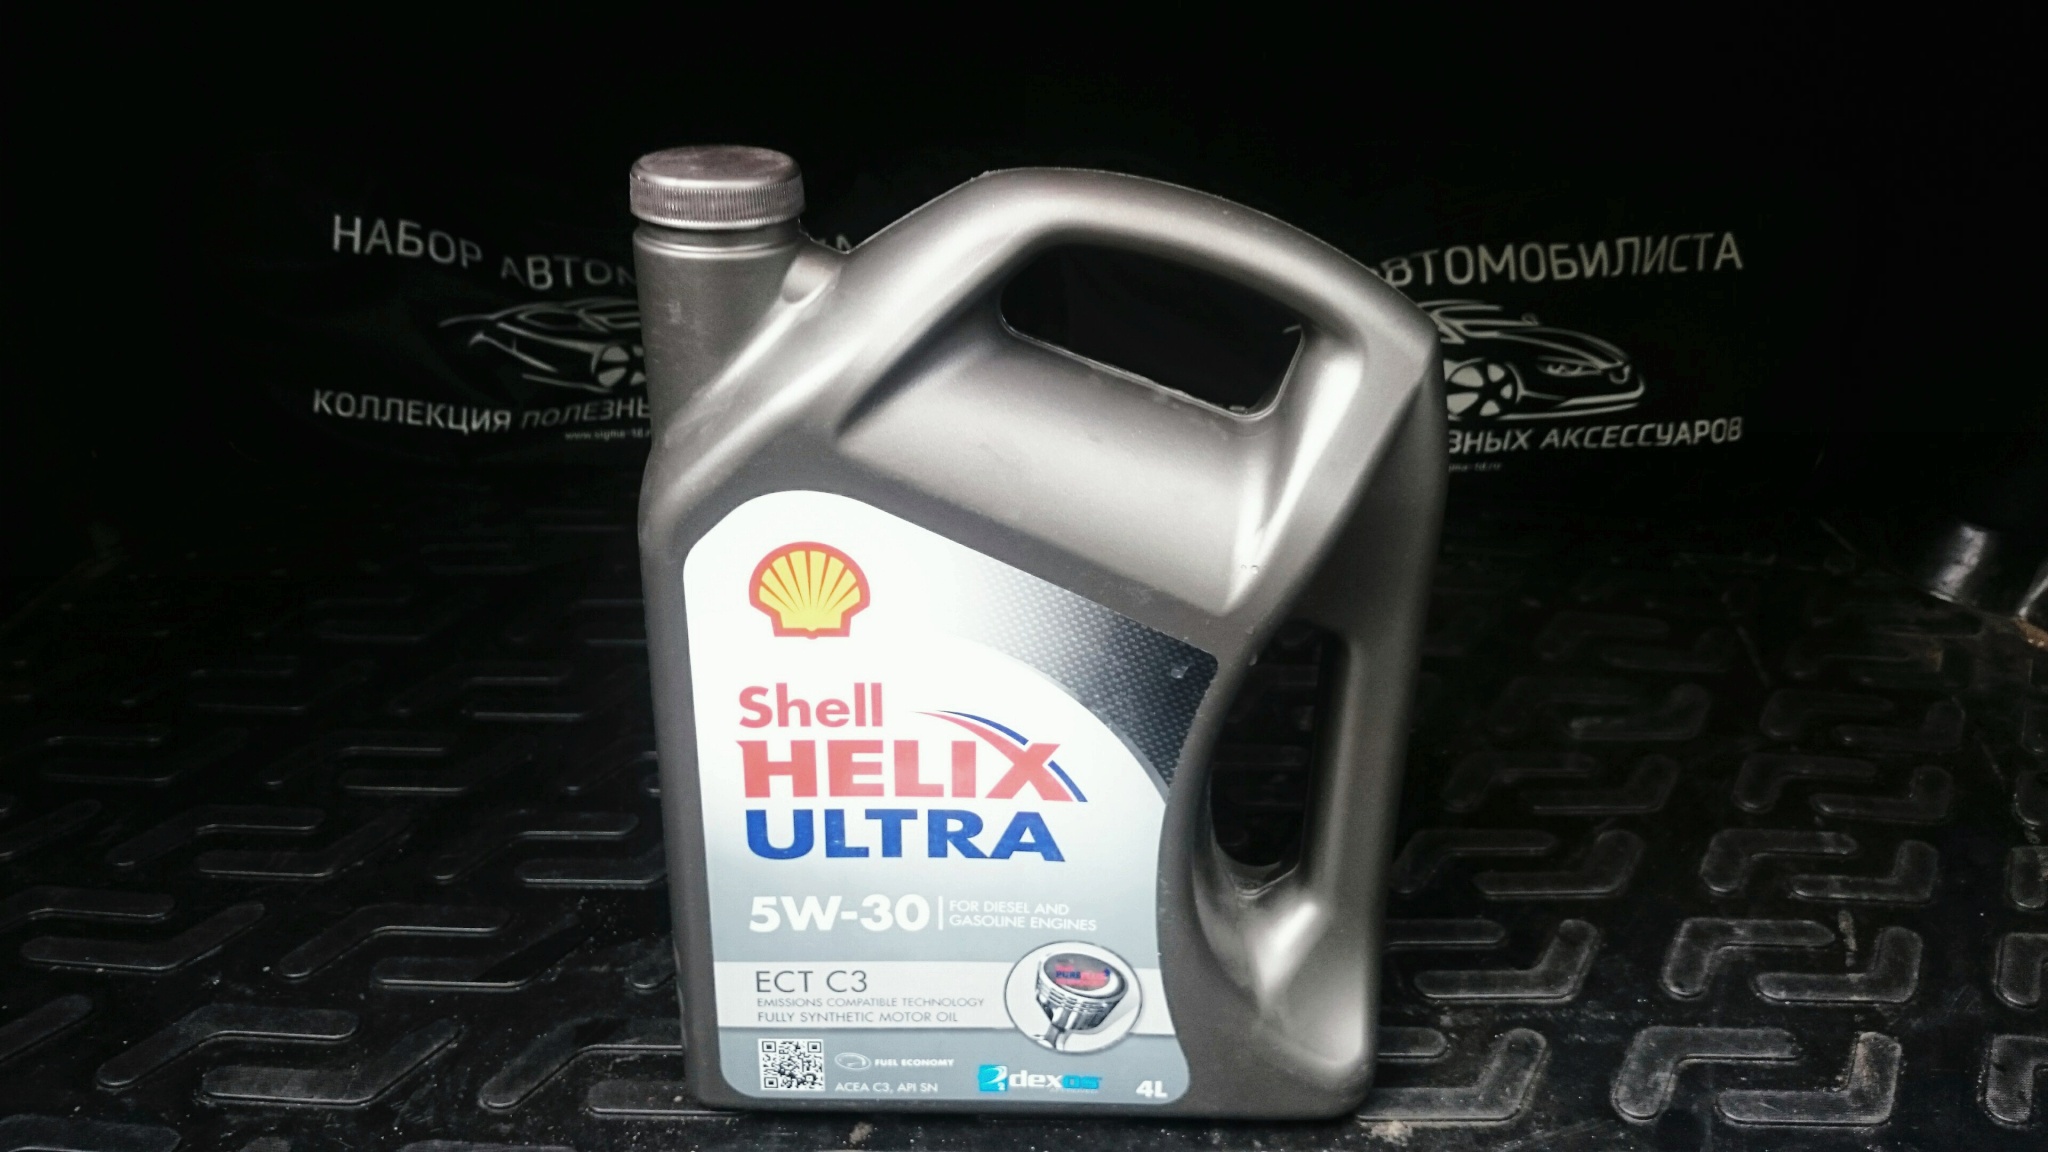 Масло shell helix ect 5w30. Shell Helix Ultra ect c3 5w-30 4 л. Helix Ultra ect c3 5w-30. Shell Helix Ultra ect 5w30 c3. Shell Helix Ultra ect c3 5w30 200 литров.